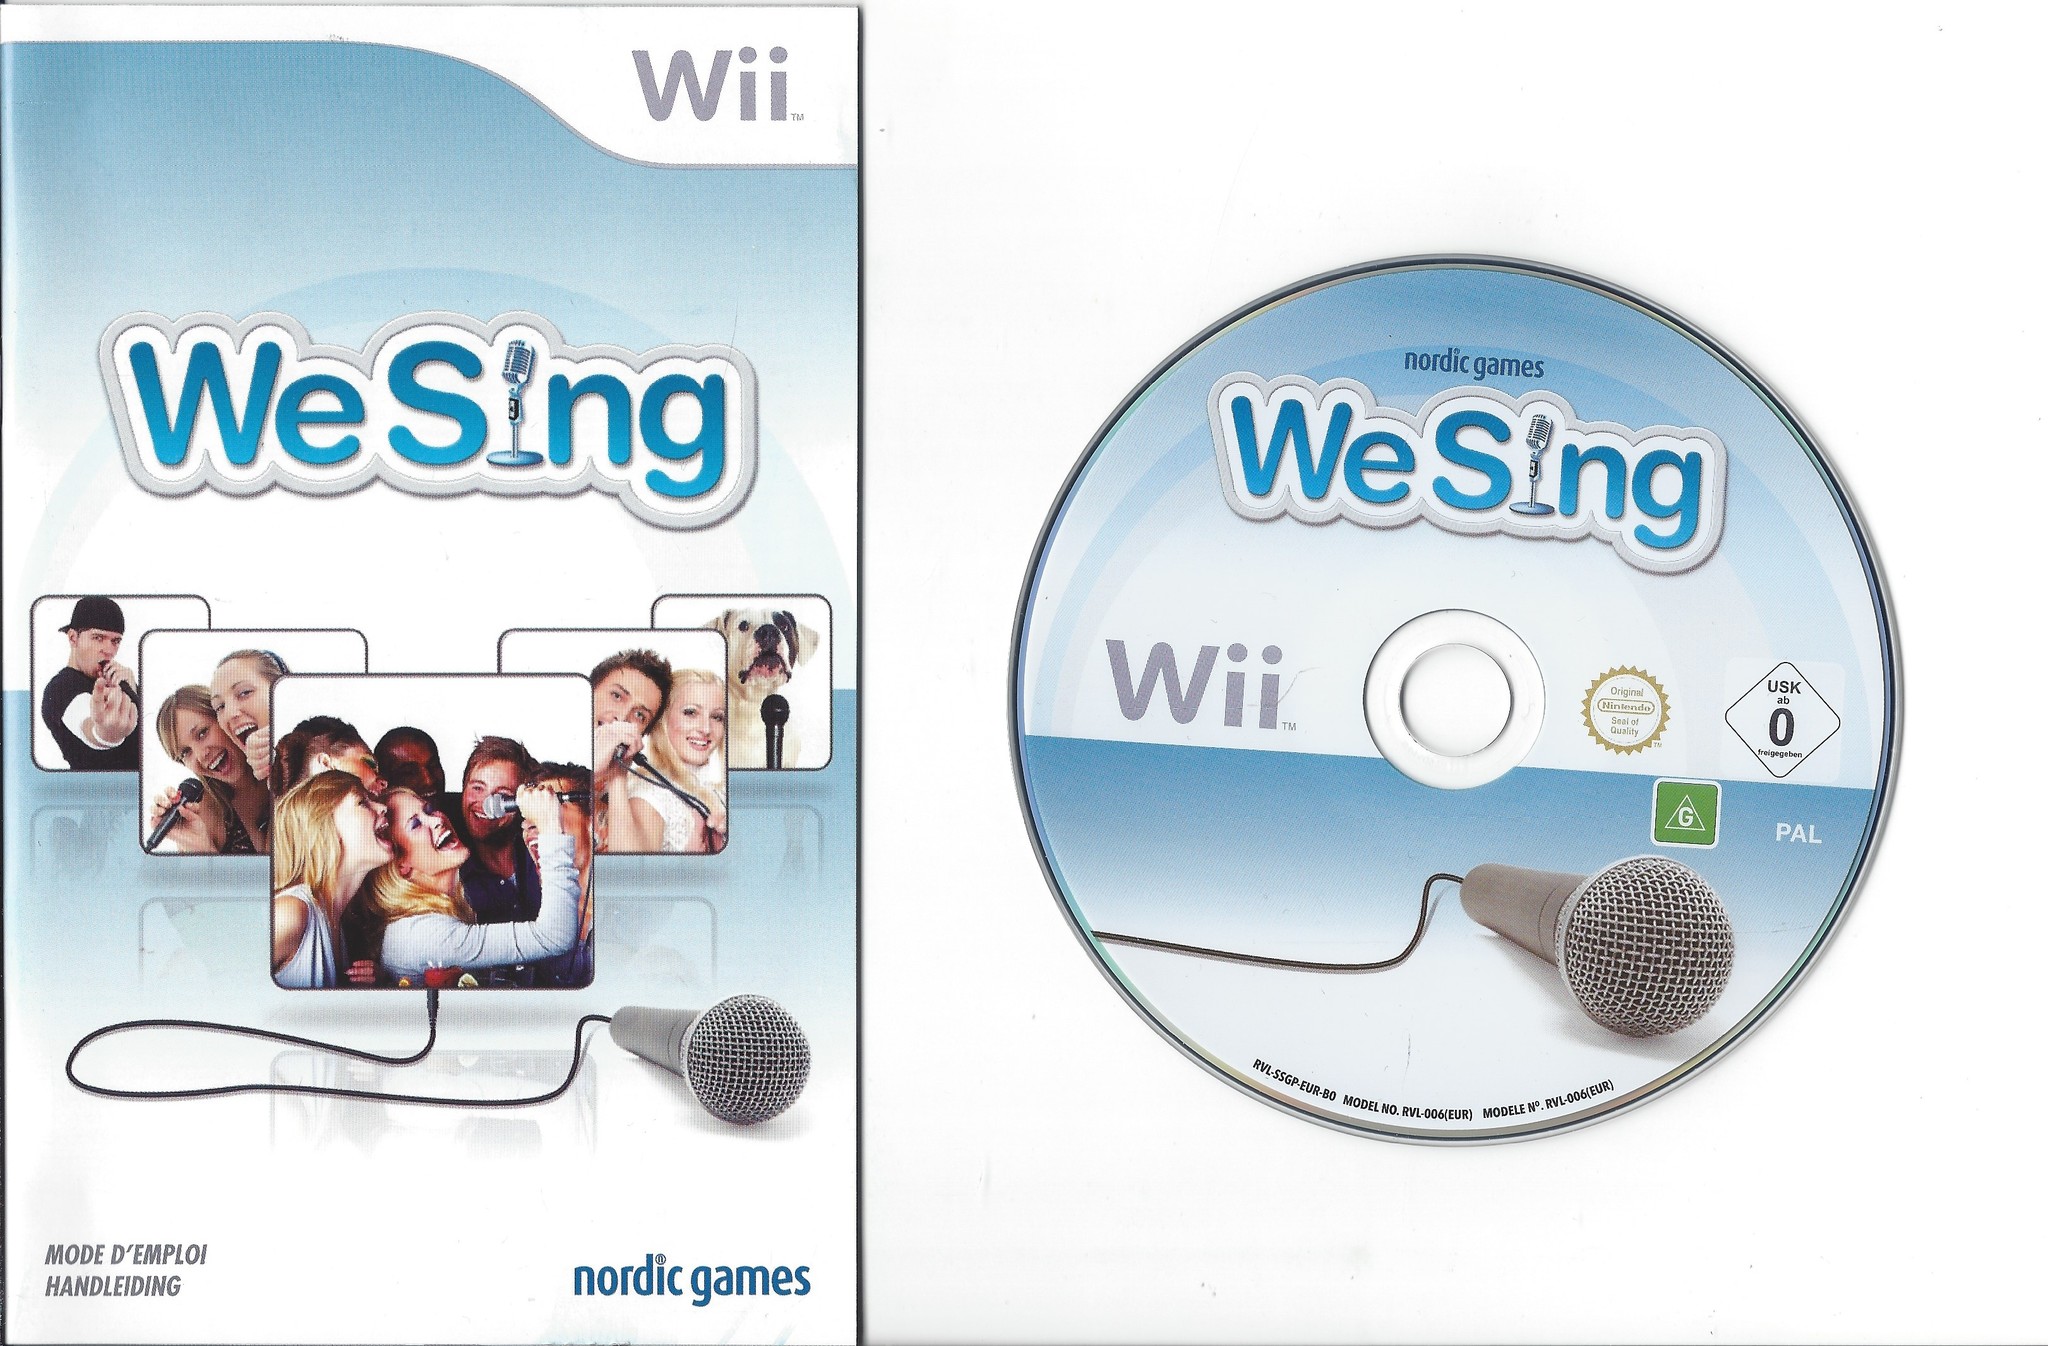 ps4 singstar recognizes songs you bought from ps3